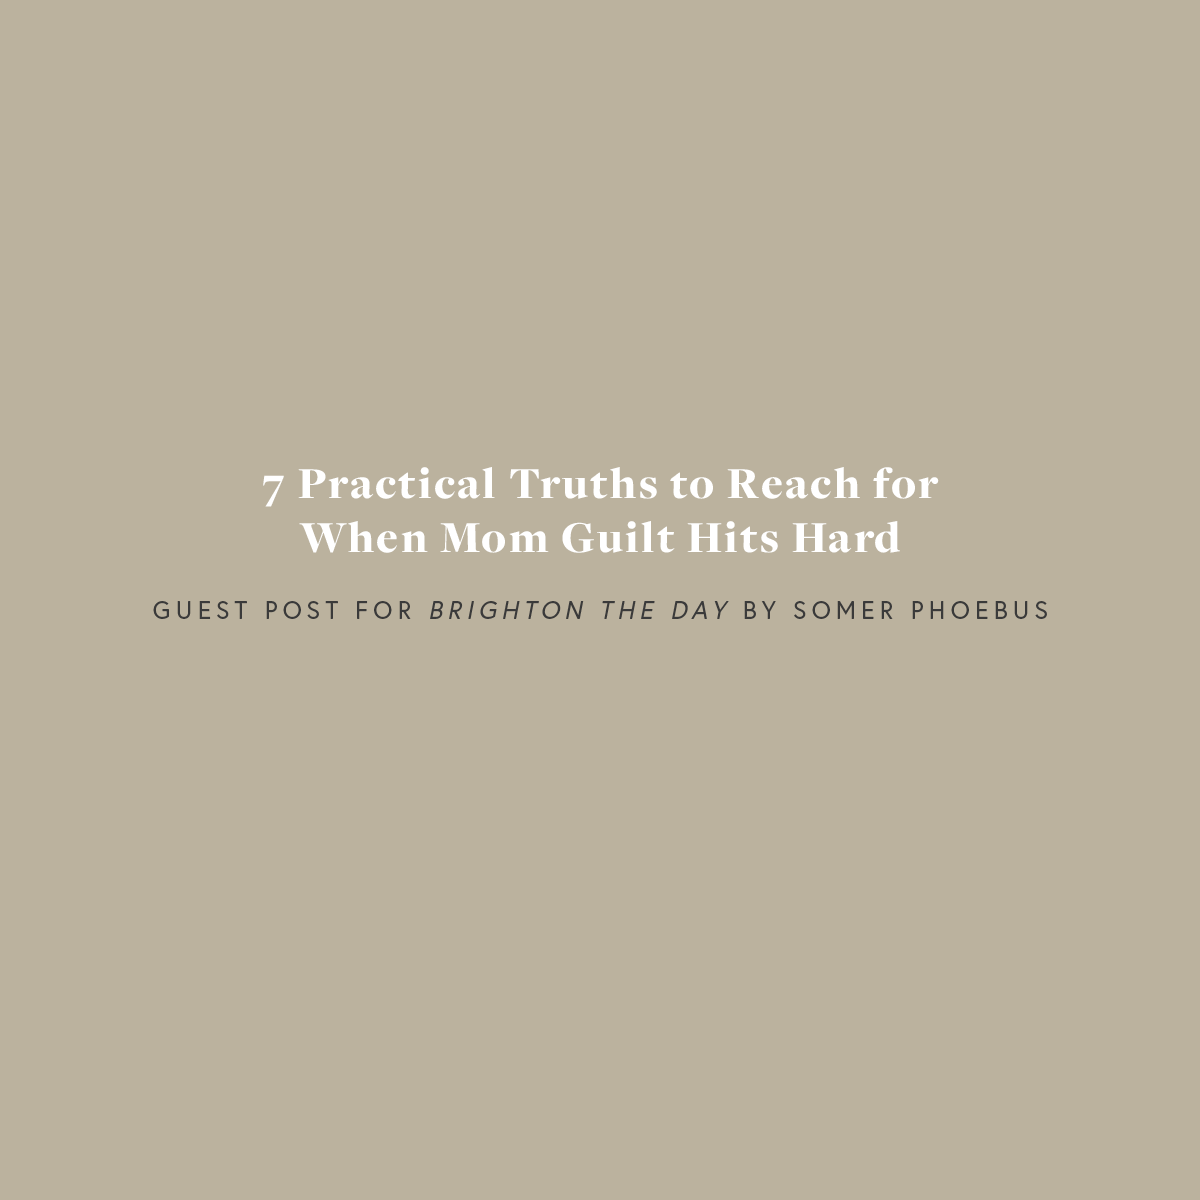 7 Practical Truths to Reach for When Mom Guilt Hits Hard